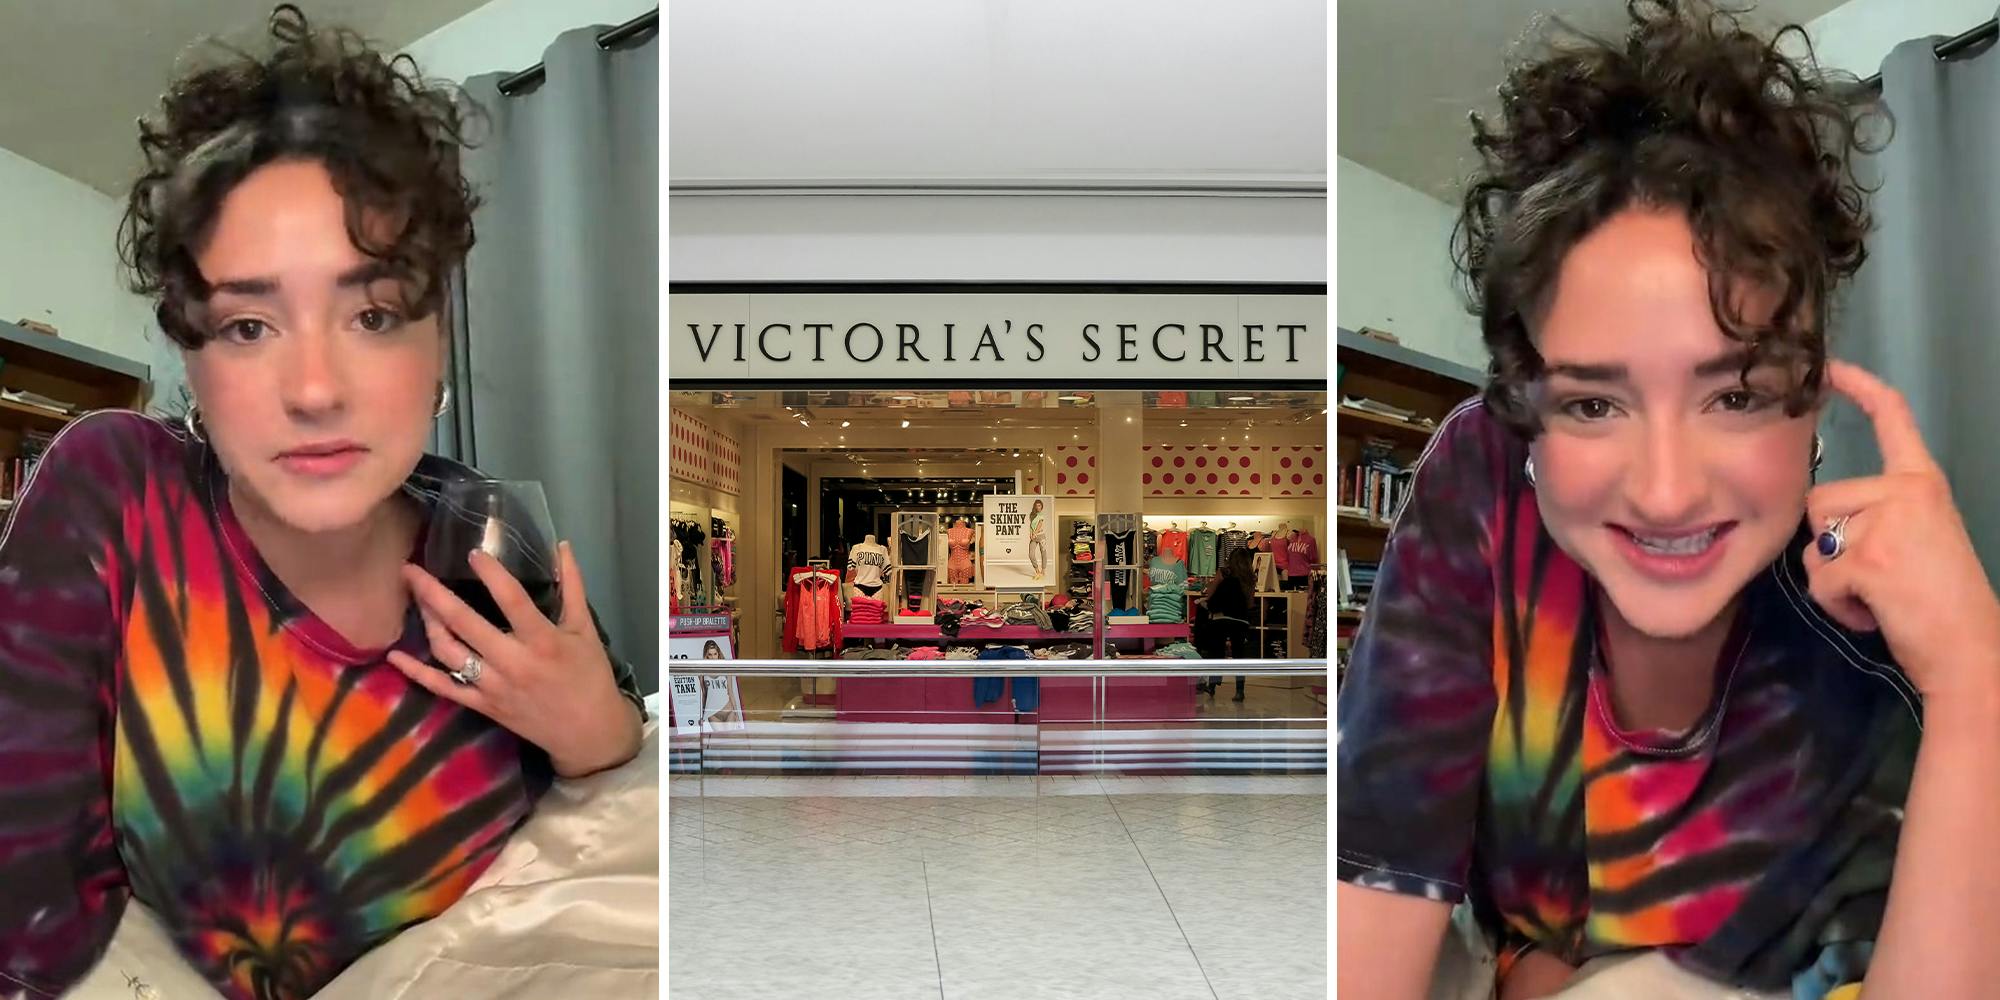 ‘I don’t even think I stole’: Victoria’s Secret worker says she got fired for dumpster diving, selling the products on eBay